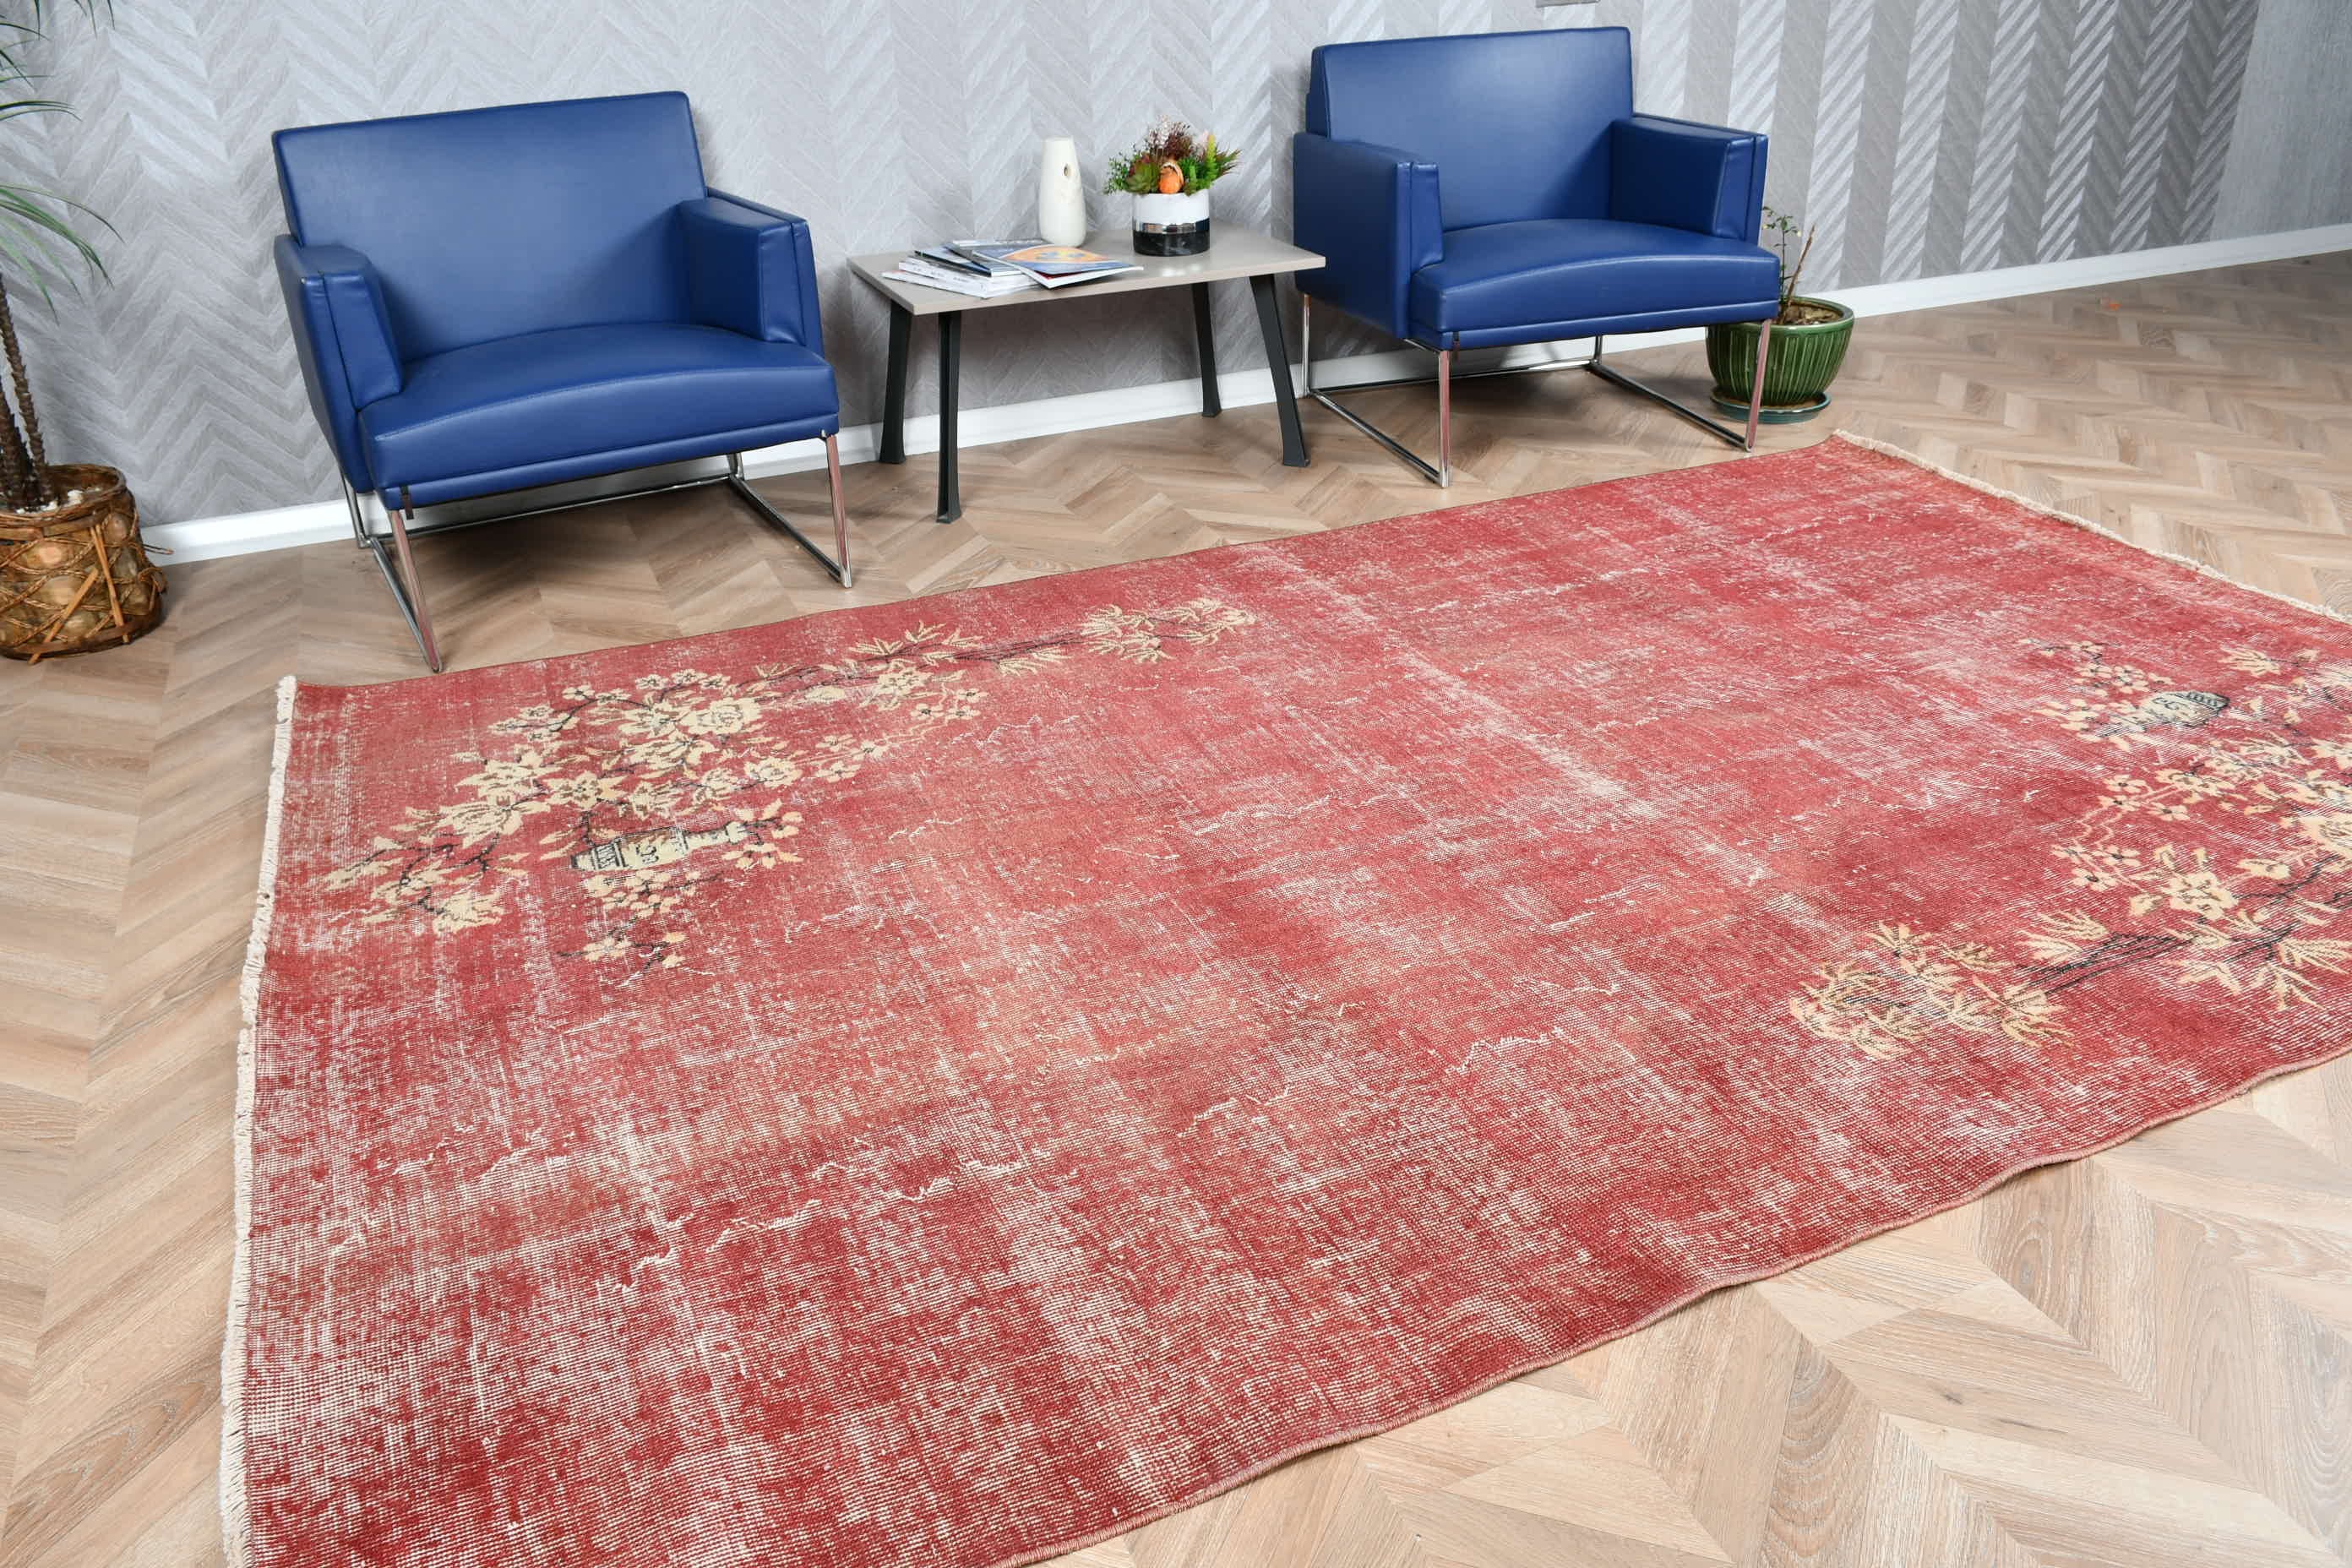 Vintage Rug, Cool Rug, Dining Room Rugs, Rugs for Dining Room, 5.9x9.4 ft Large Rugs, Turkish Rugs, Anatolian Rugs, Red Bedroom Rugs